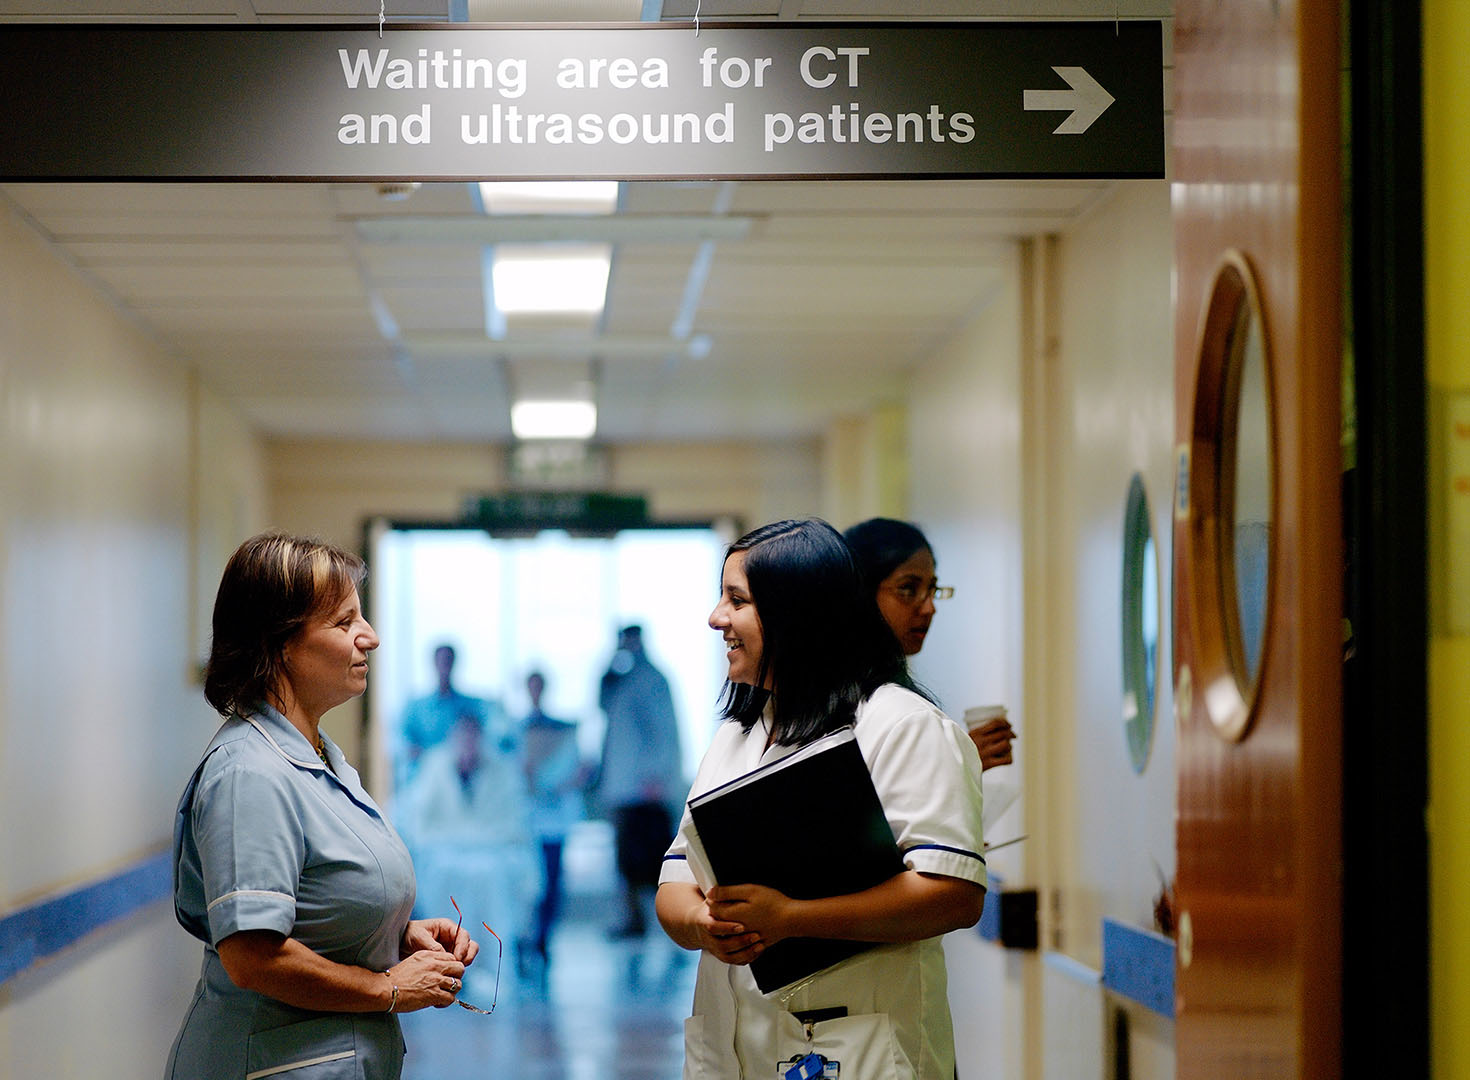 Nurse in discussion with Radiographer in hospital corridor